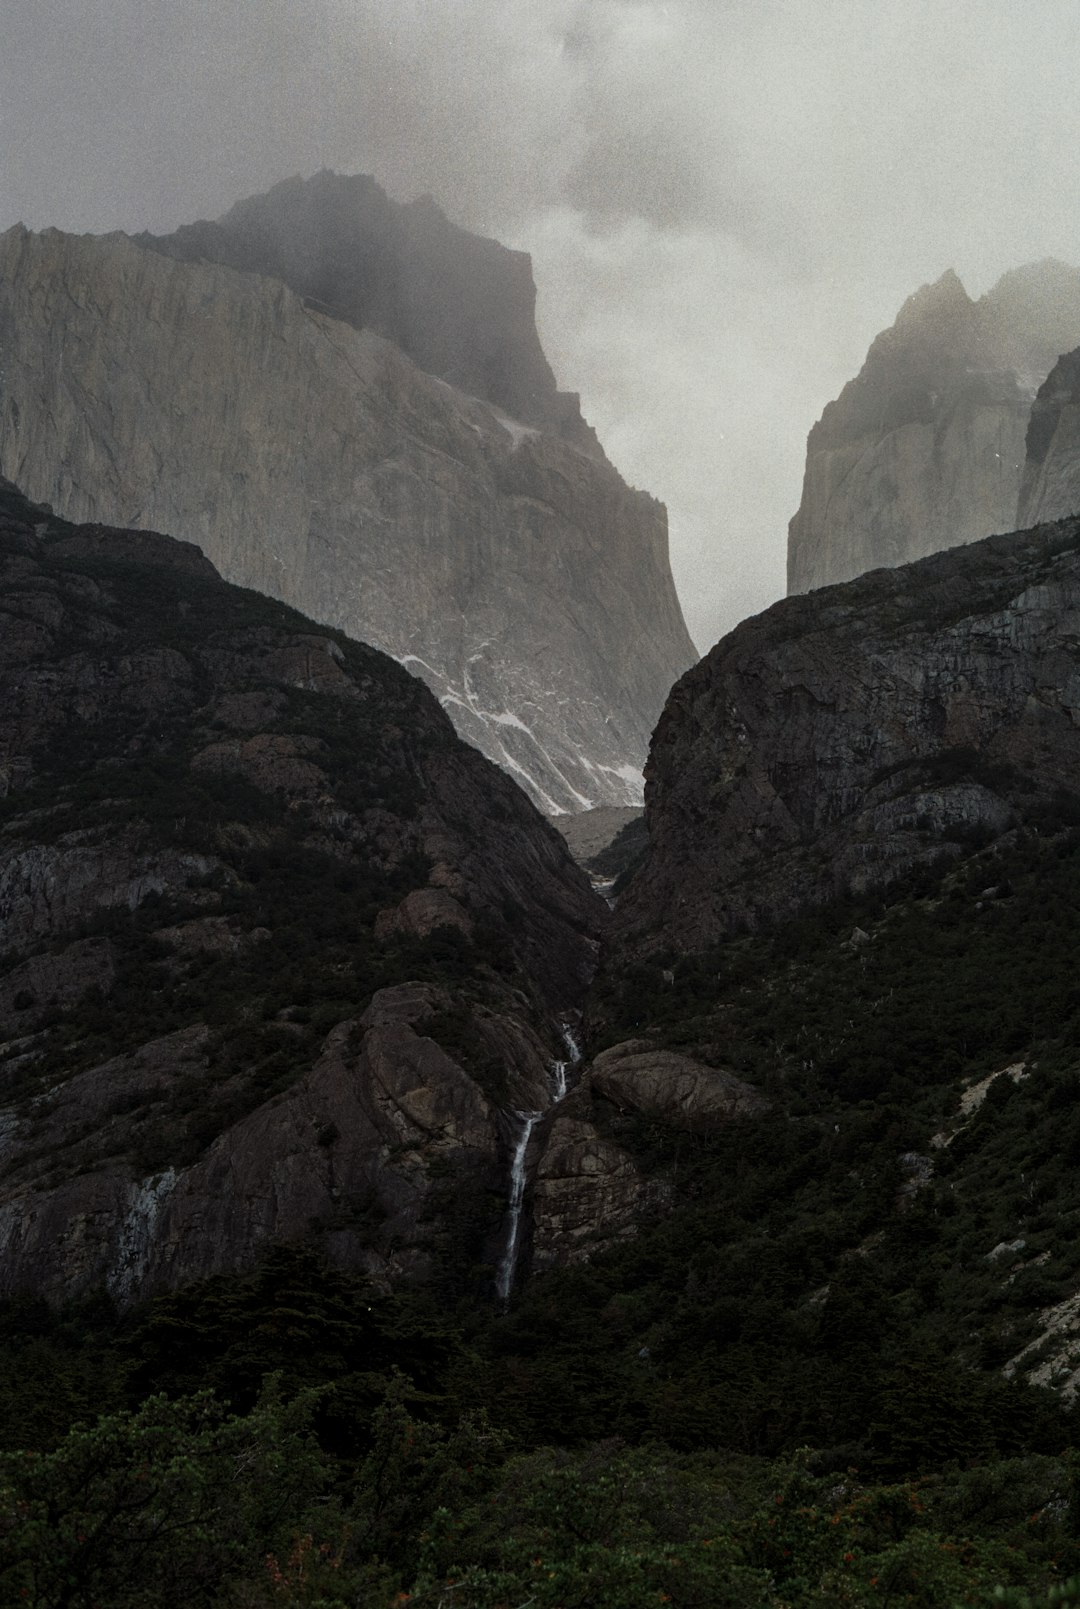 waterfall in the middle of two mountains during a foggy weather